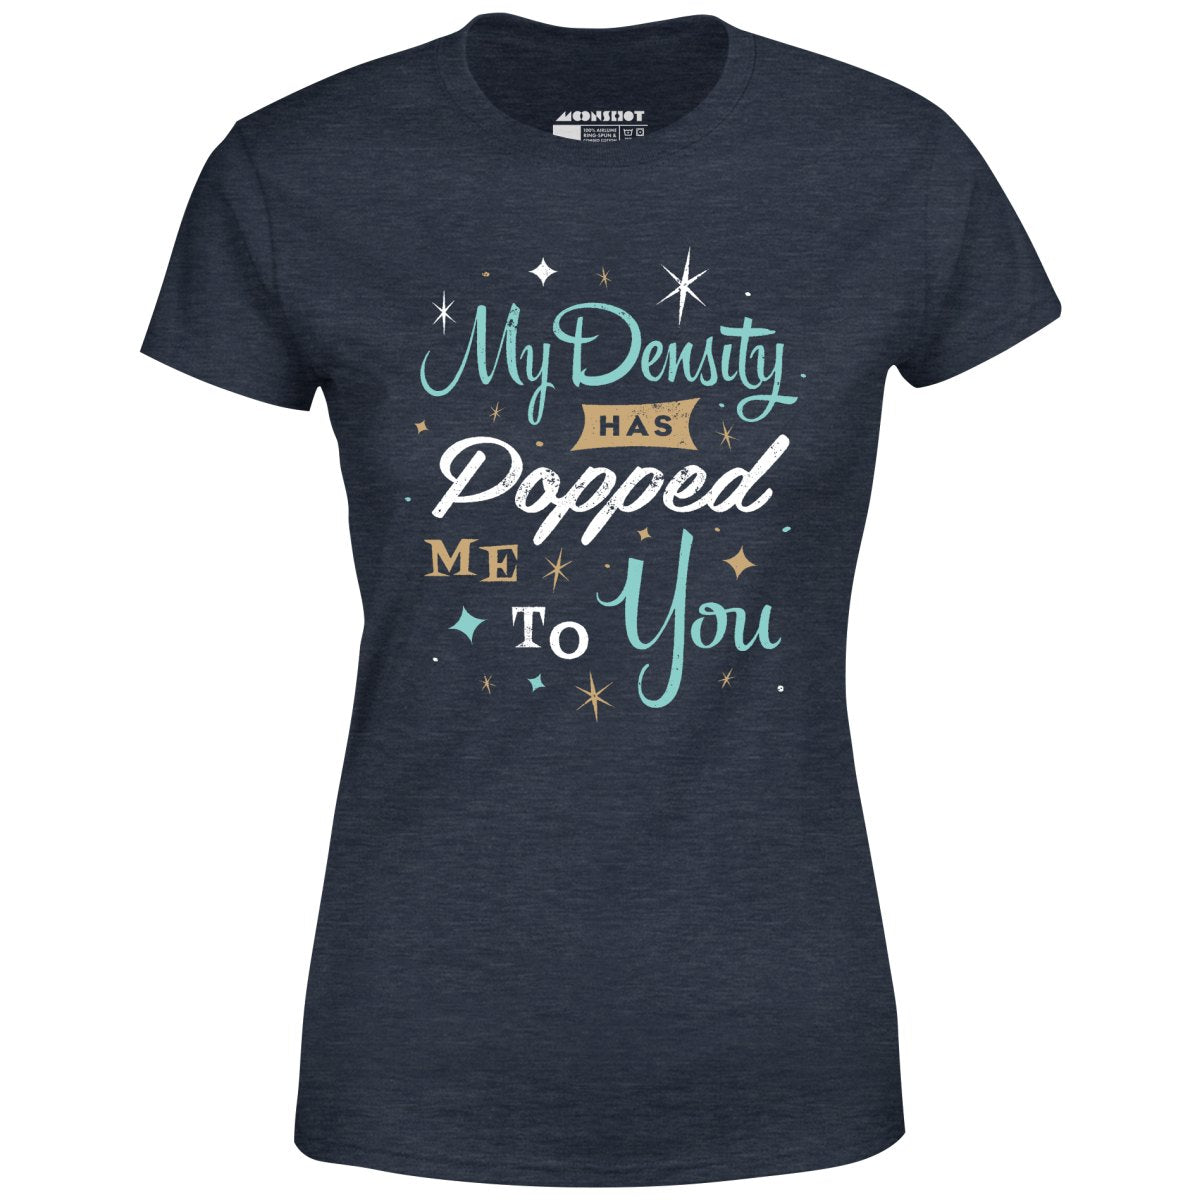 My Density Has Popped Me To You - Women's T-Shirt